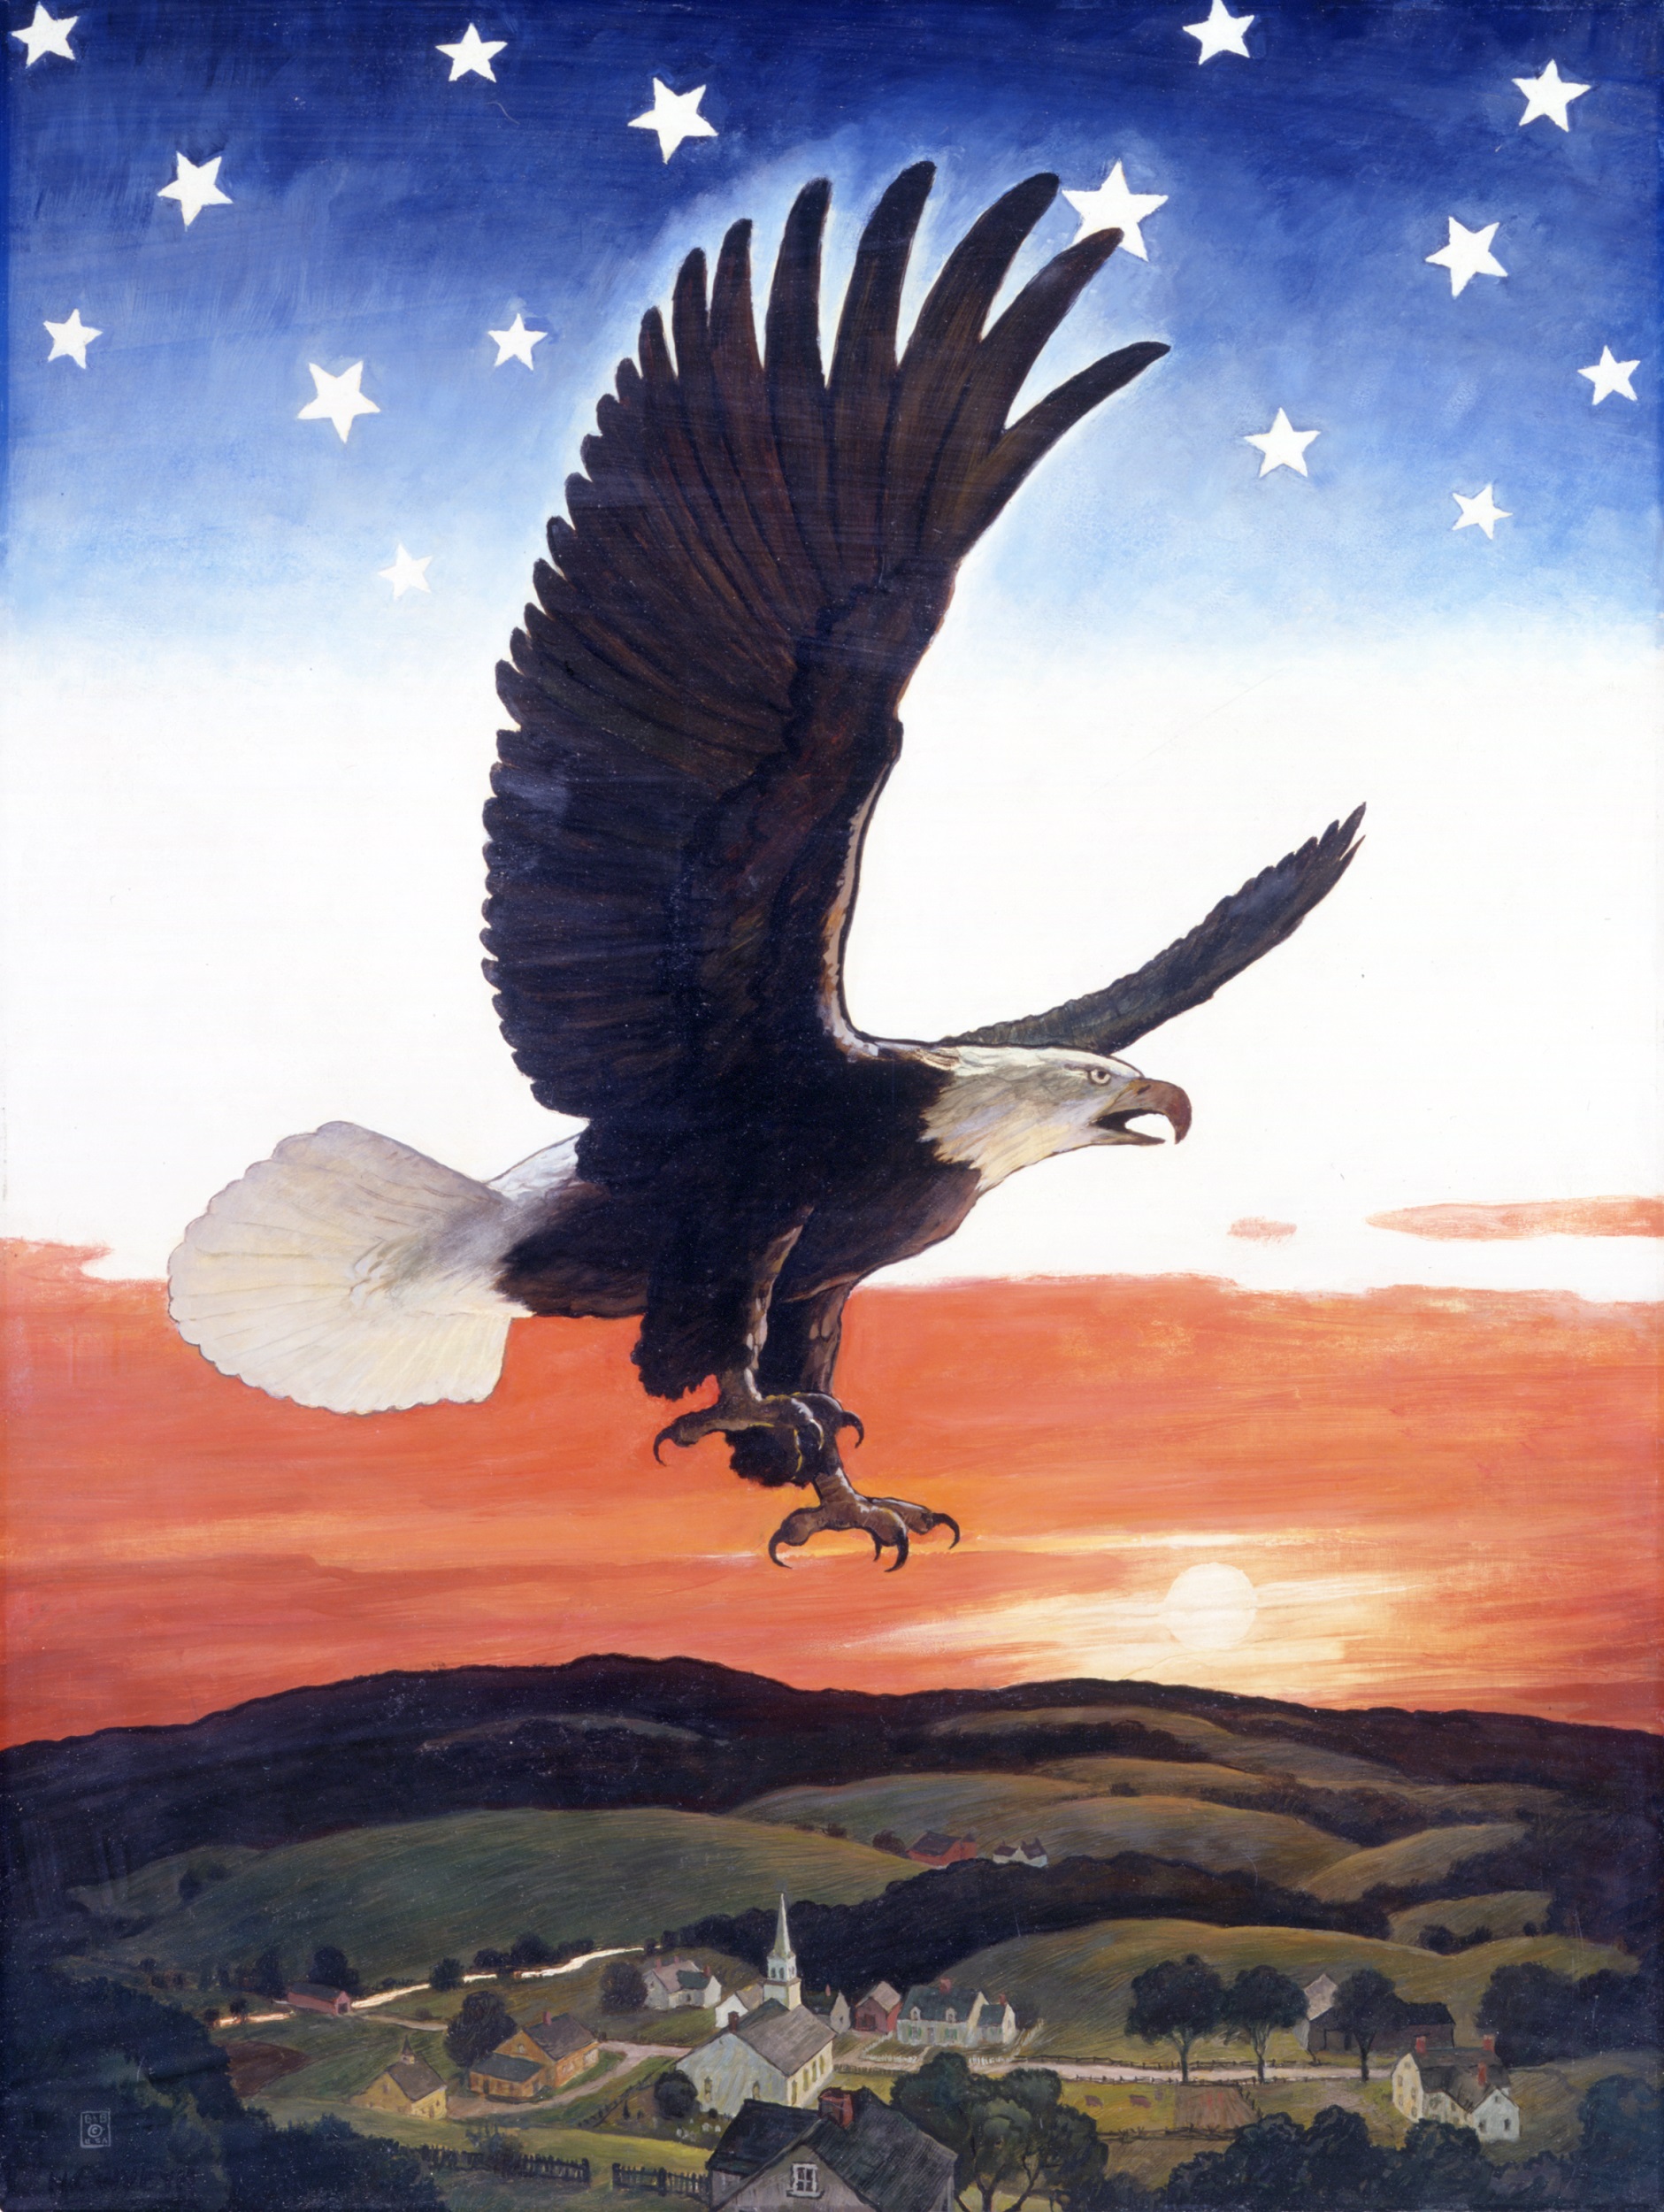 Painting of a bald eagle flying over a a small town including a church with a white steeple. The sky is red, white, and blue with white stars.